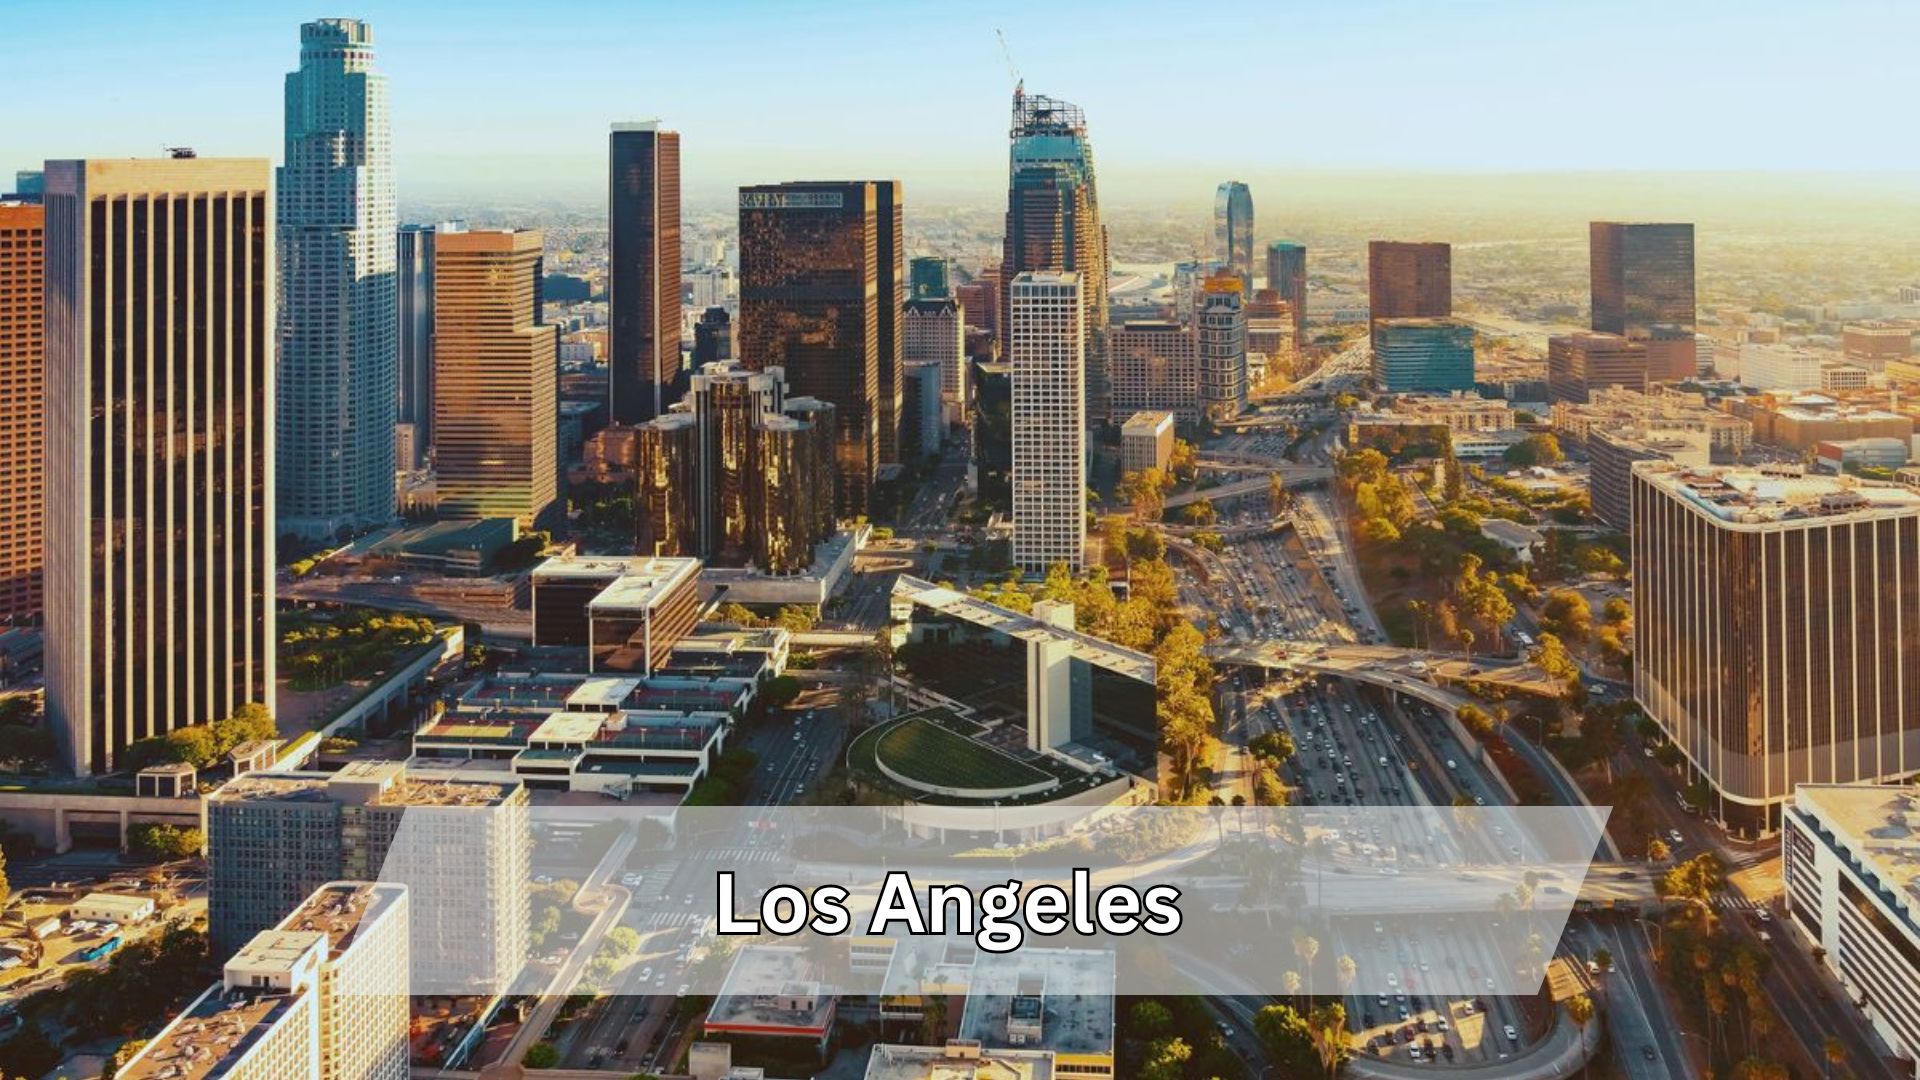 Los Angeles: A Global City and Cultural Hub